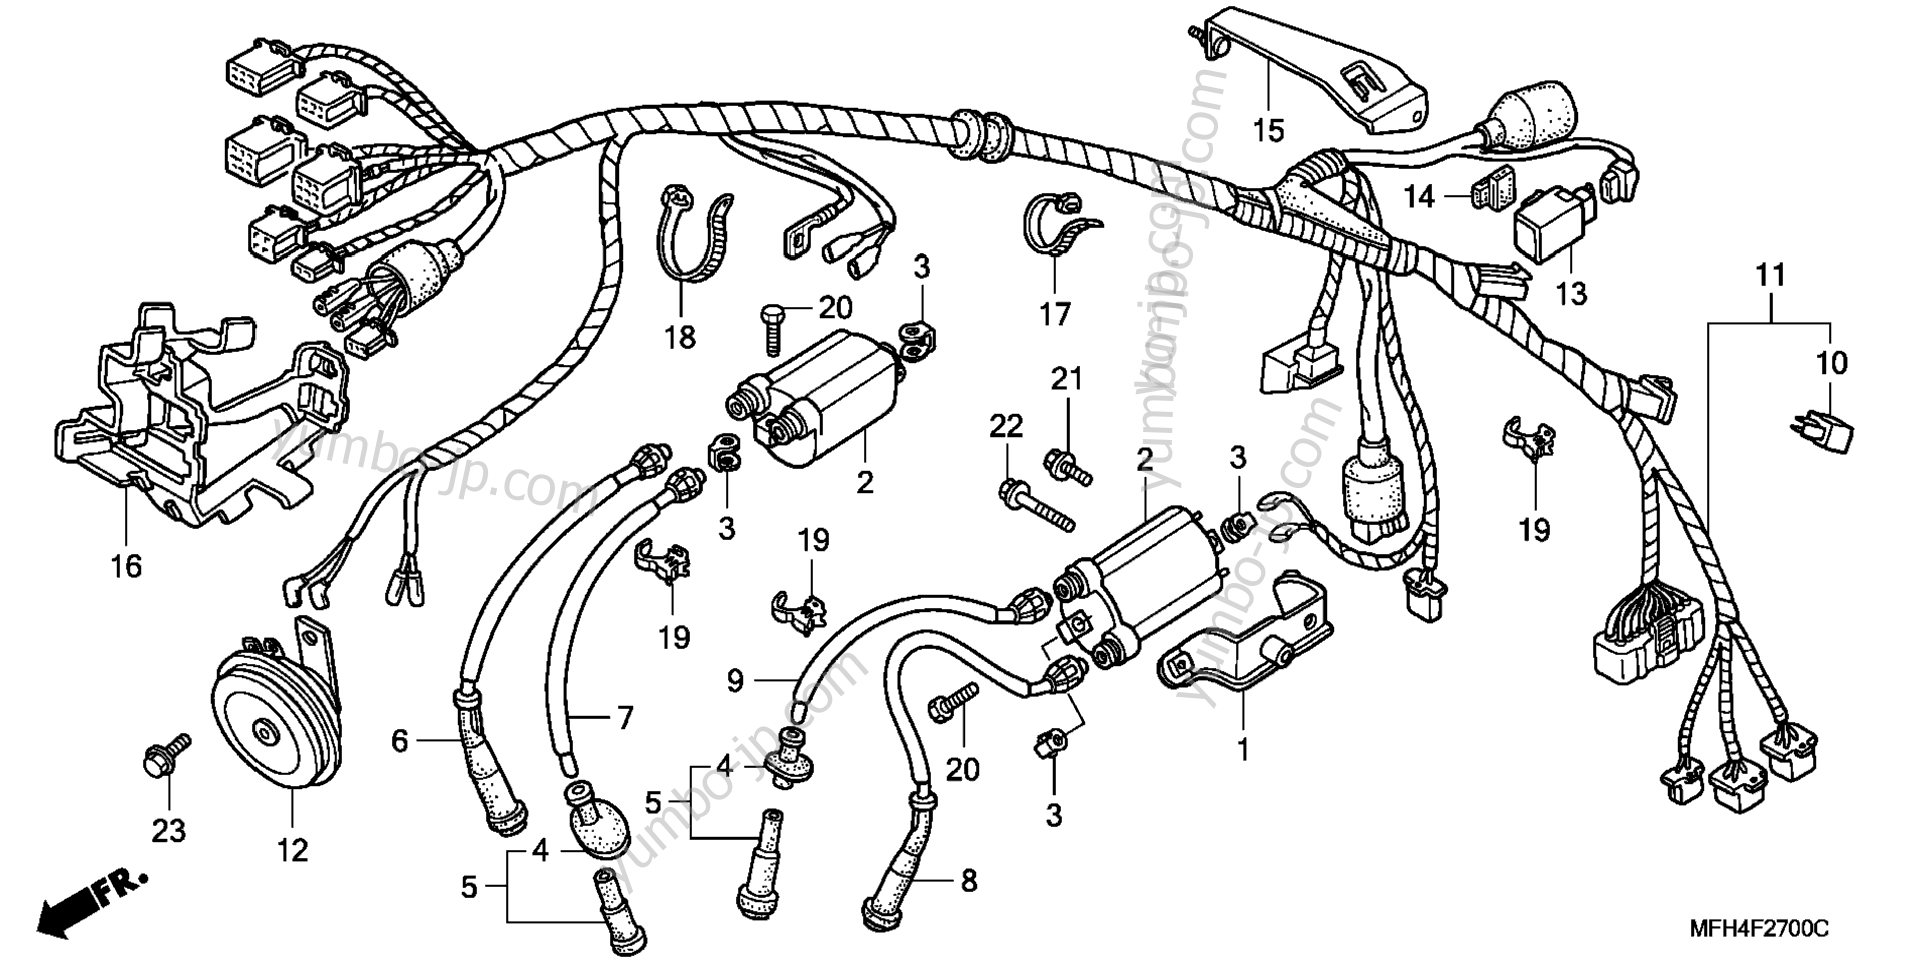 WIRE HARNESS for motorcycles HONDA VT600C AC/A 2006 year